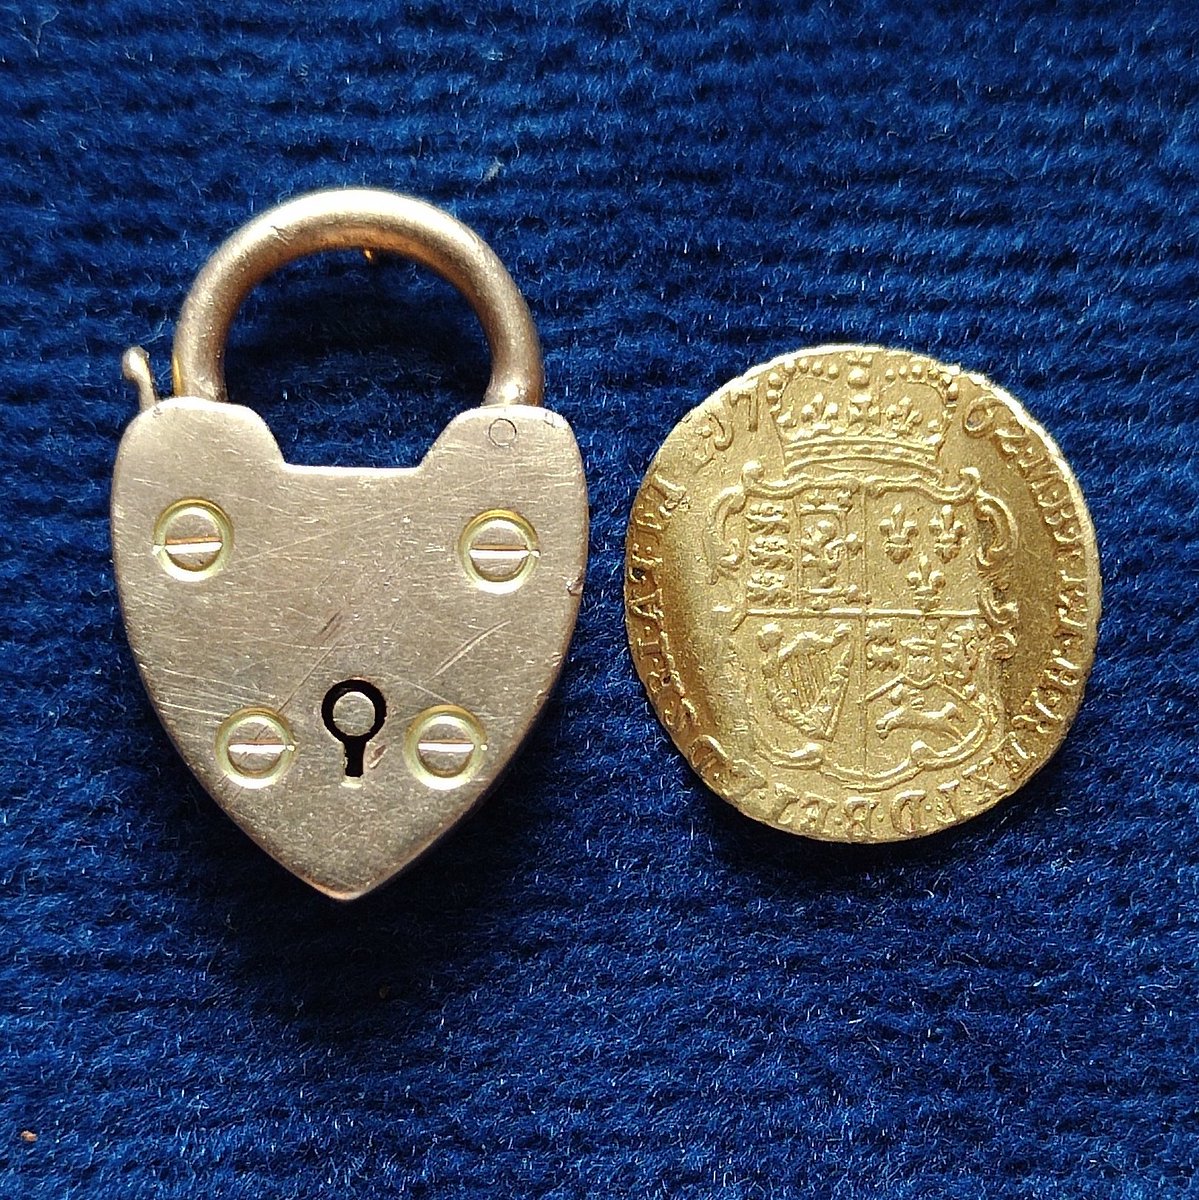 In 2022 I found 2 gold items. The padlock on 1st January, and the coin on 31st December. With an intriguing link, both tokens of affection. What are the odds on that happening 😆 M. W. From BAM 3rd October 1899 Quarter Guinea of George III, 1762,bent to form a love token.